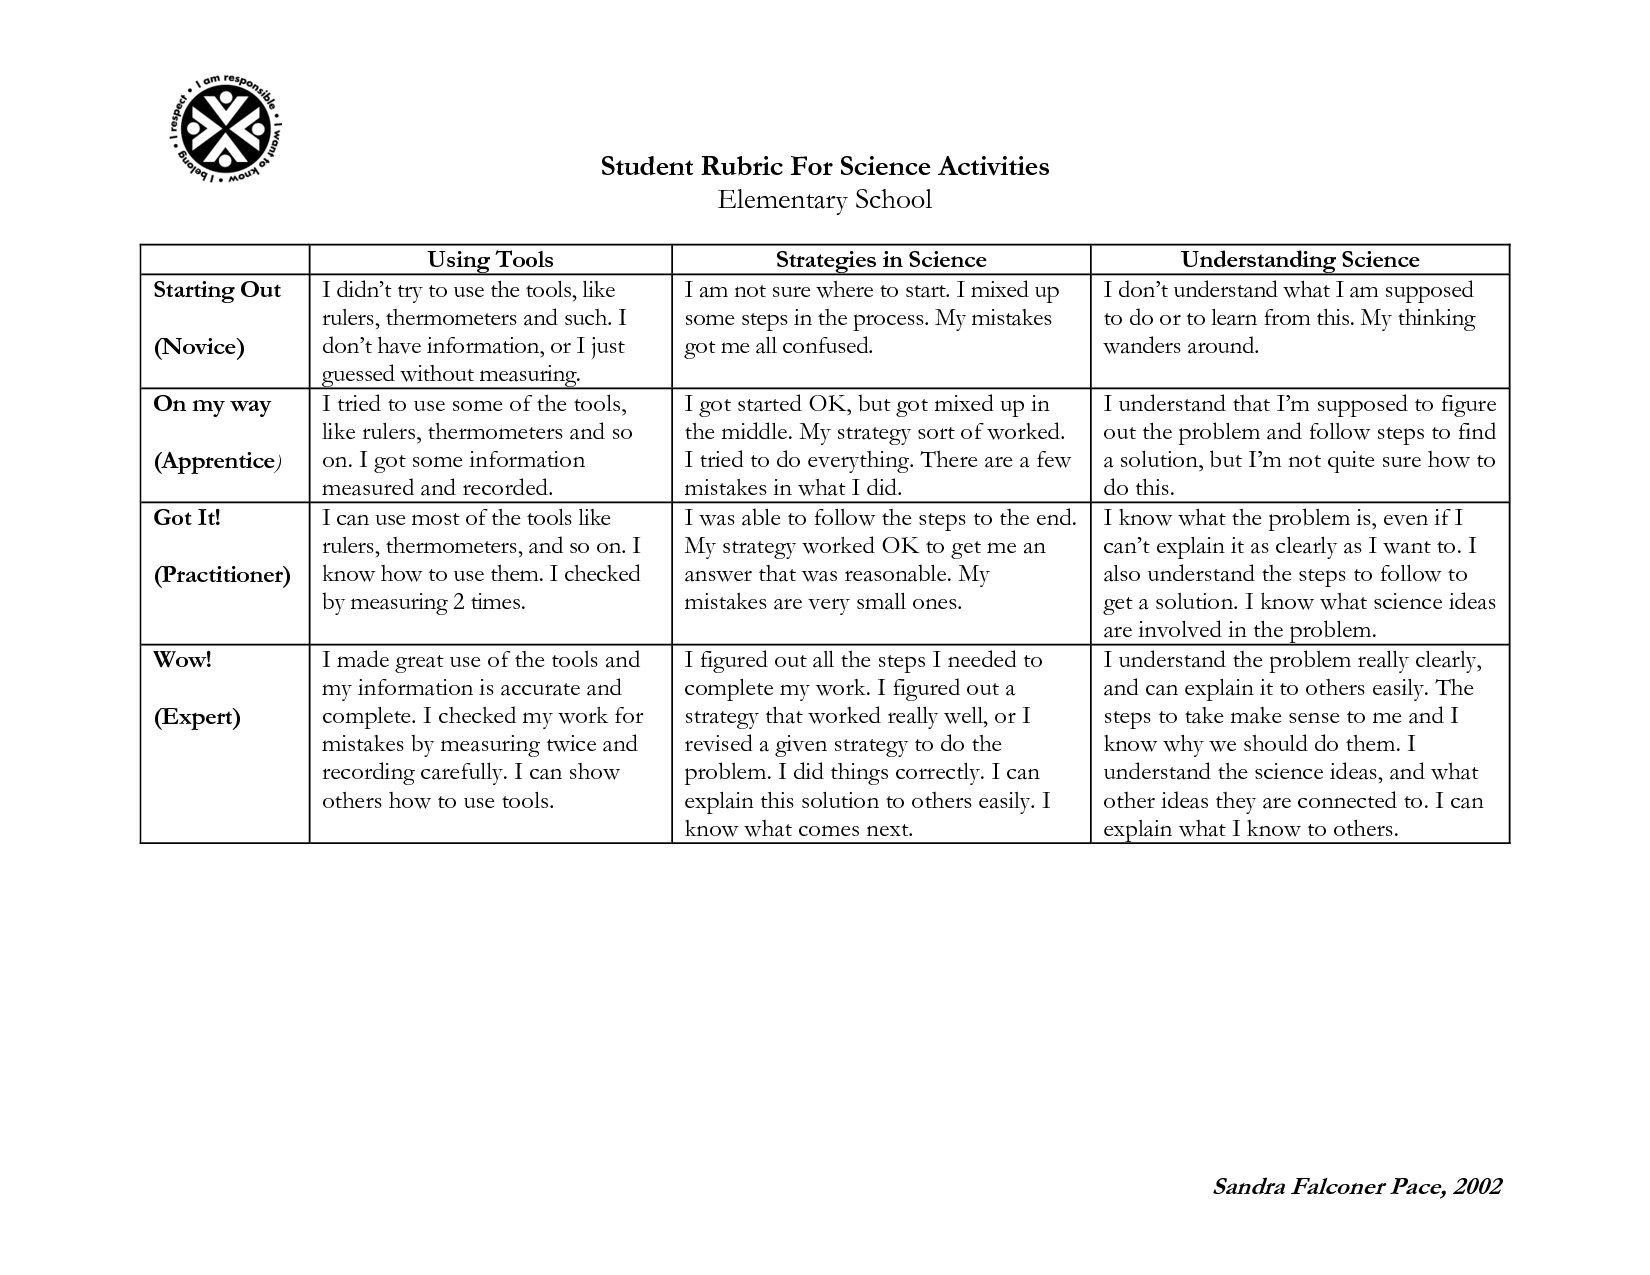 Science Rubrics for Elementary Students Image